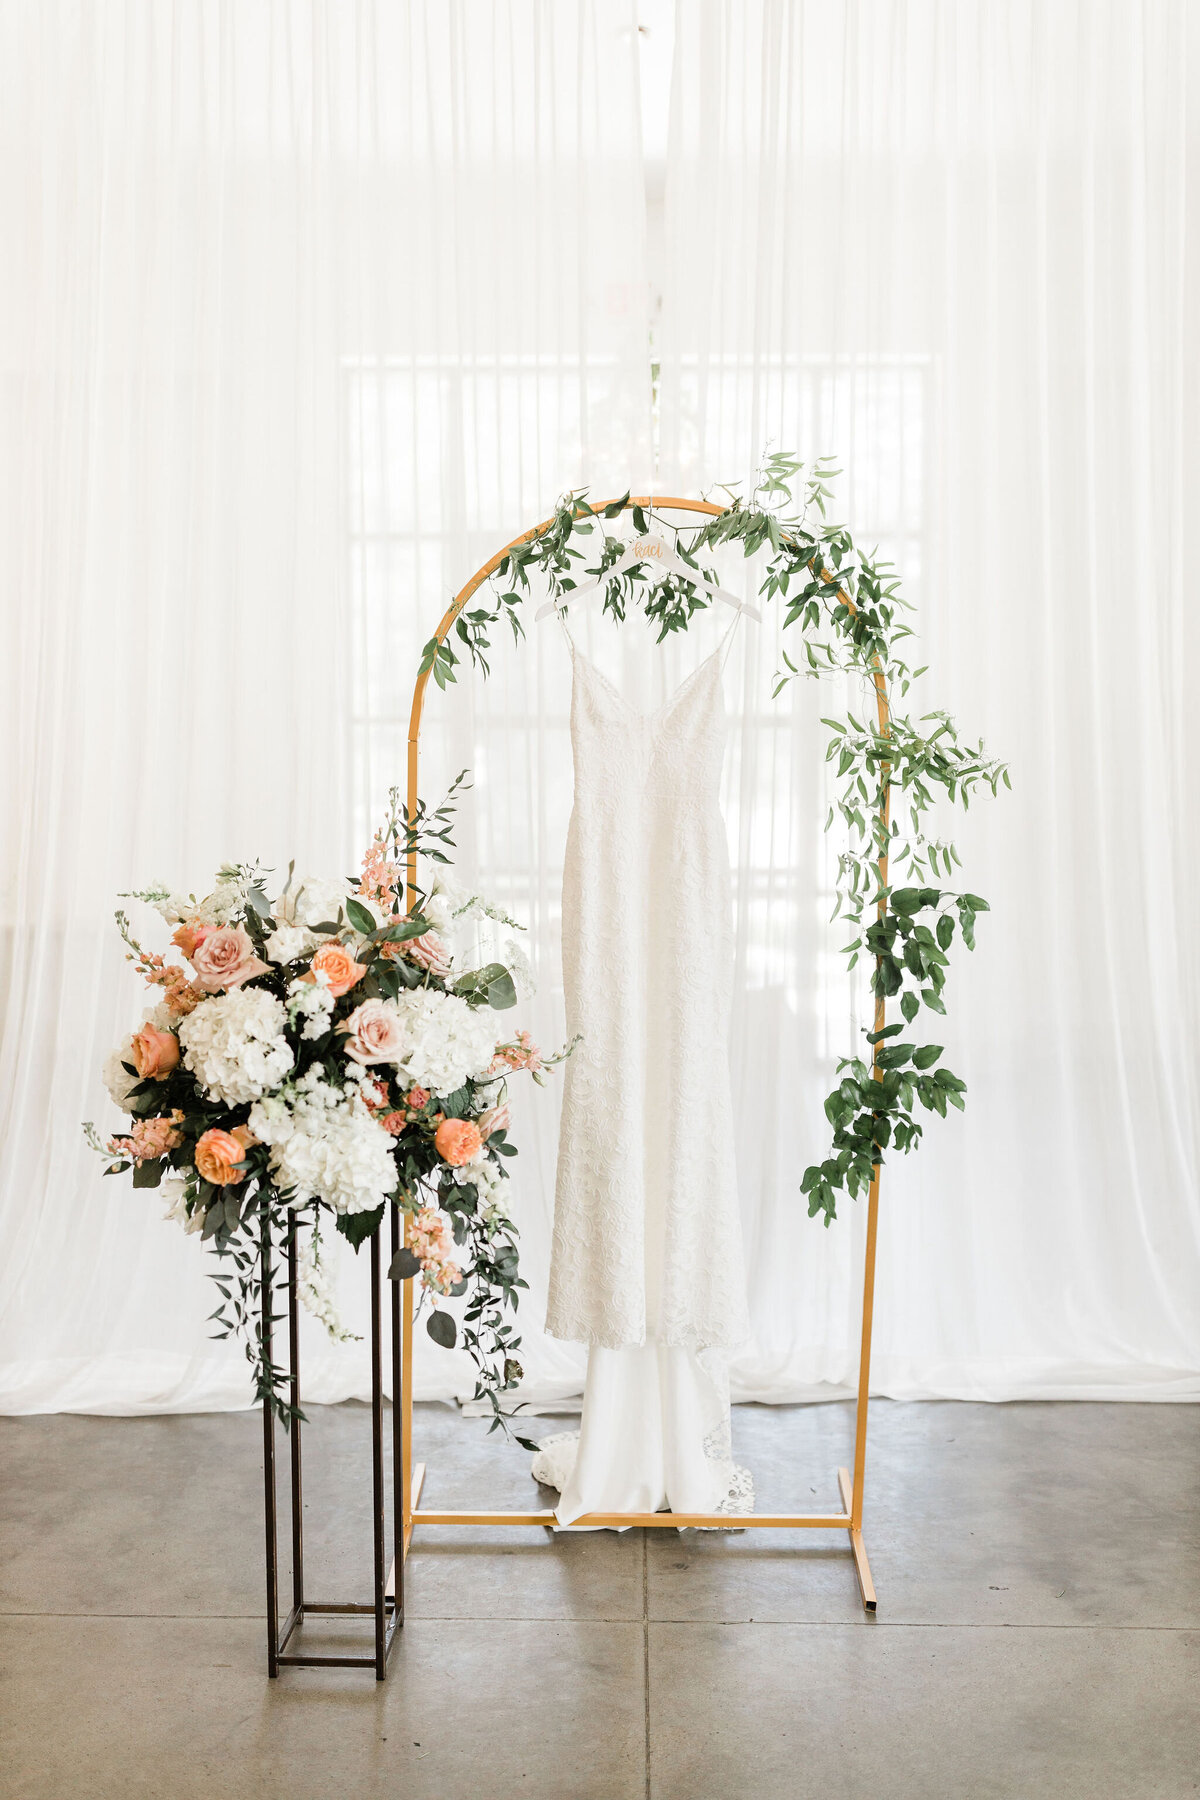 This stunning dress and these incredible flower arrangements were absolutely stunning.